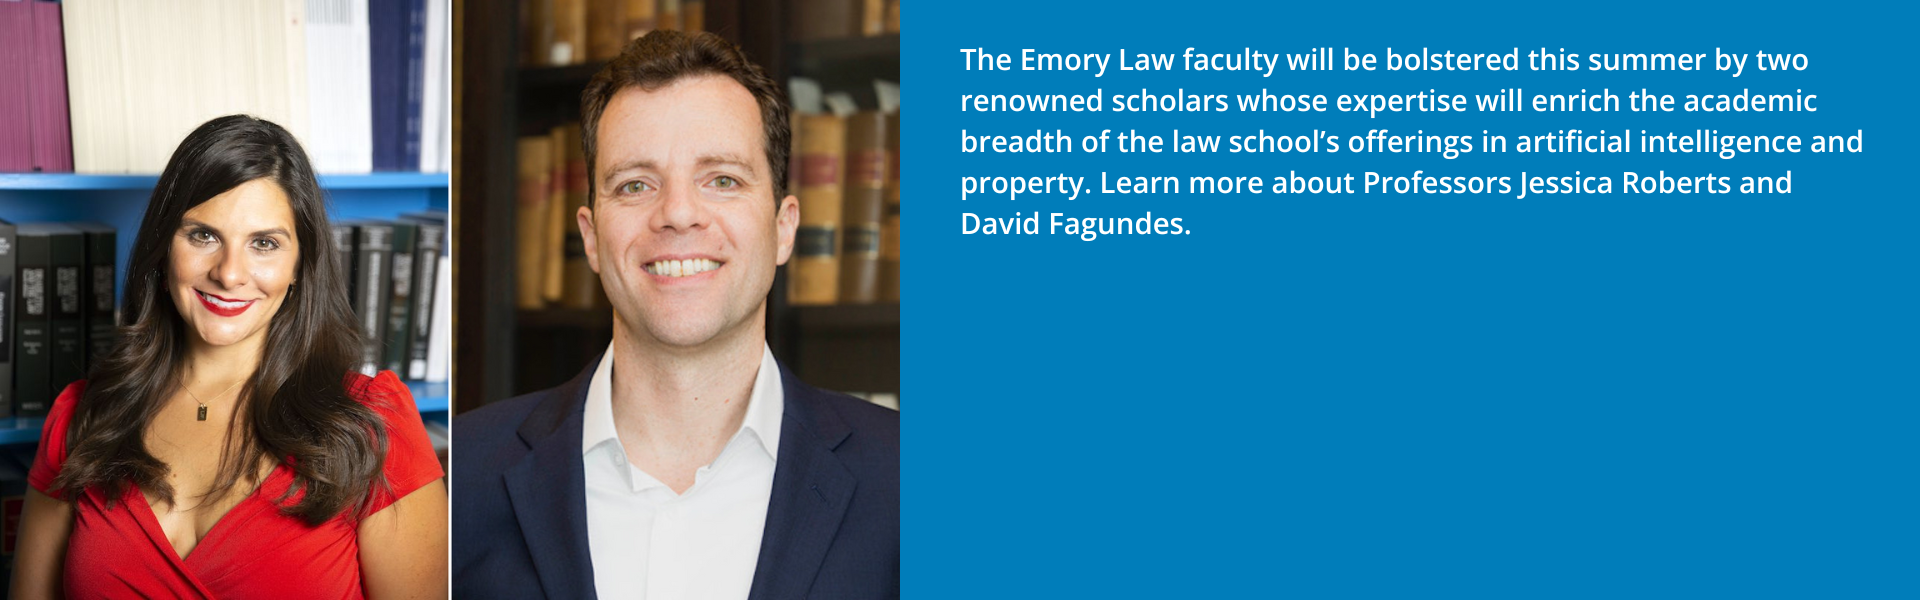 Emory Law will add 2 new faculty focused on AI and intellectual property